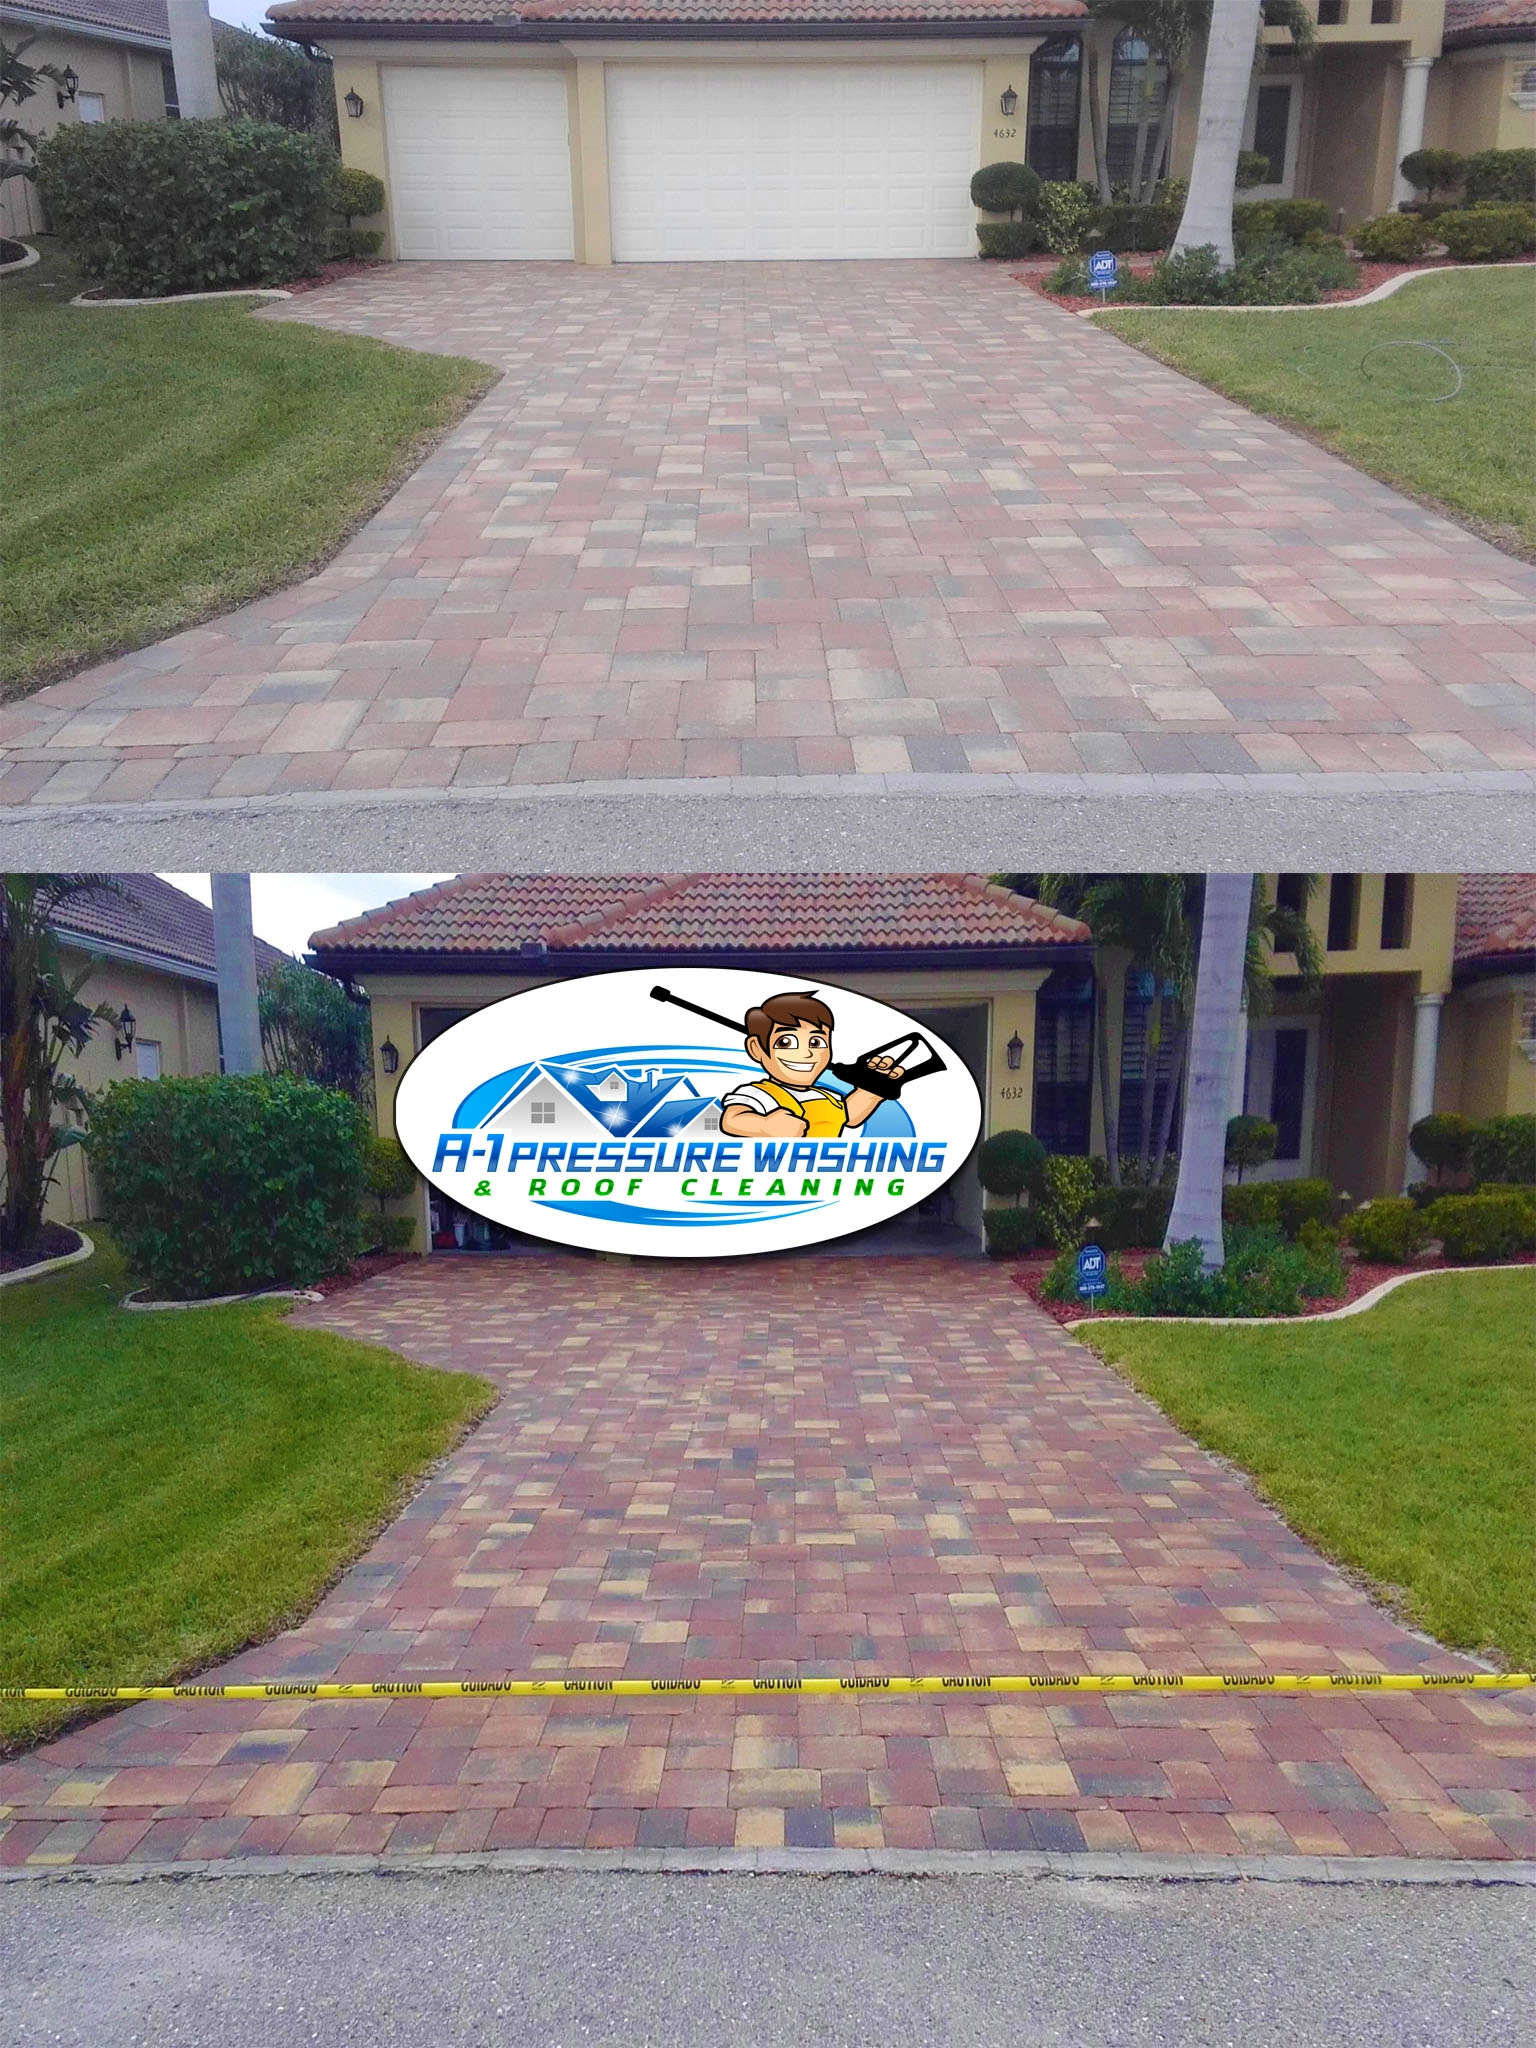 Brick Paver Sealing | A-1 Pressure Washing & Roof Cleaning | 941-815-8454 